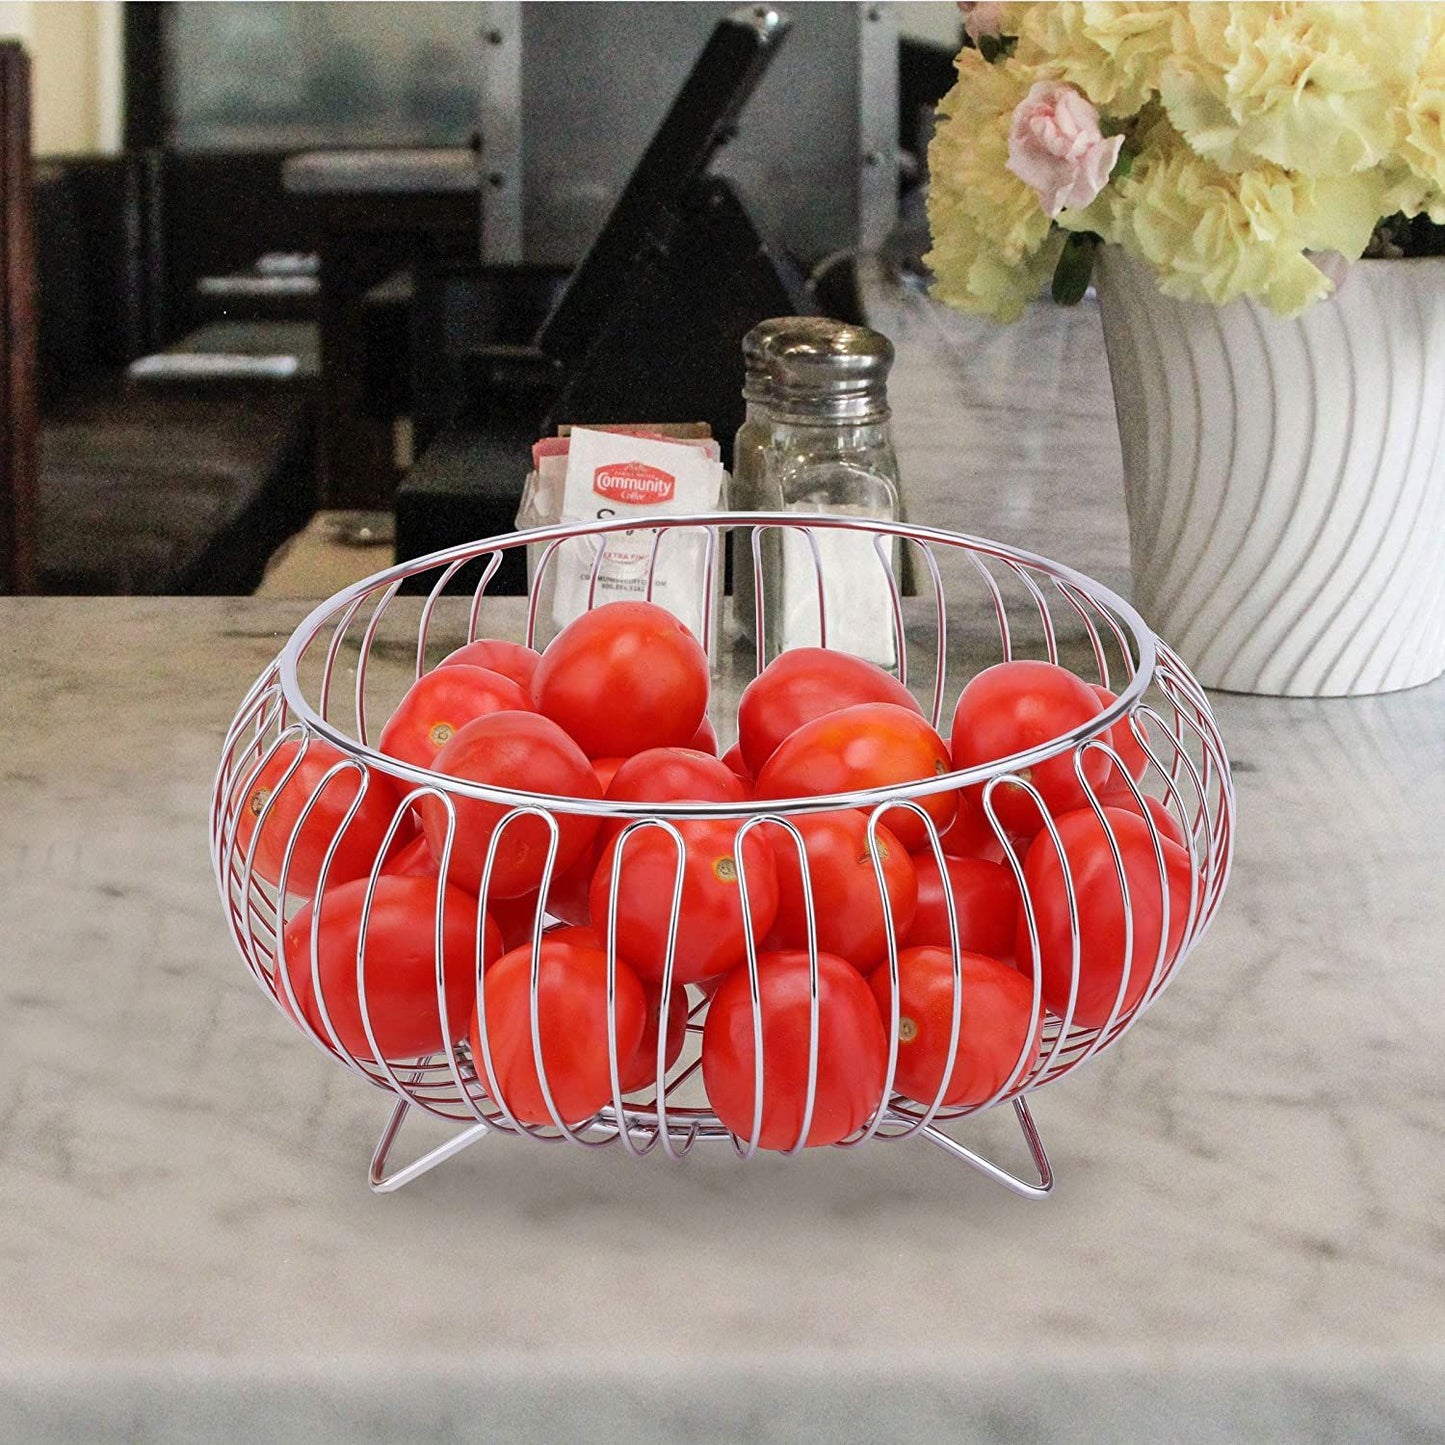 Stainless Steel Vegetable and Fruit Bowl Basket with Chrome Plated